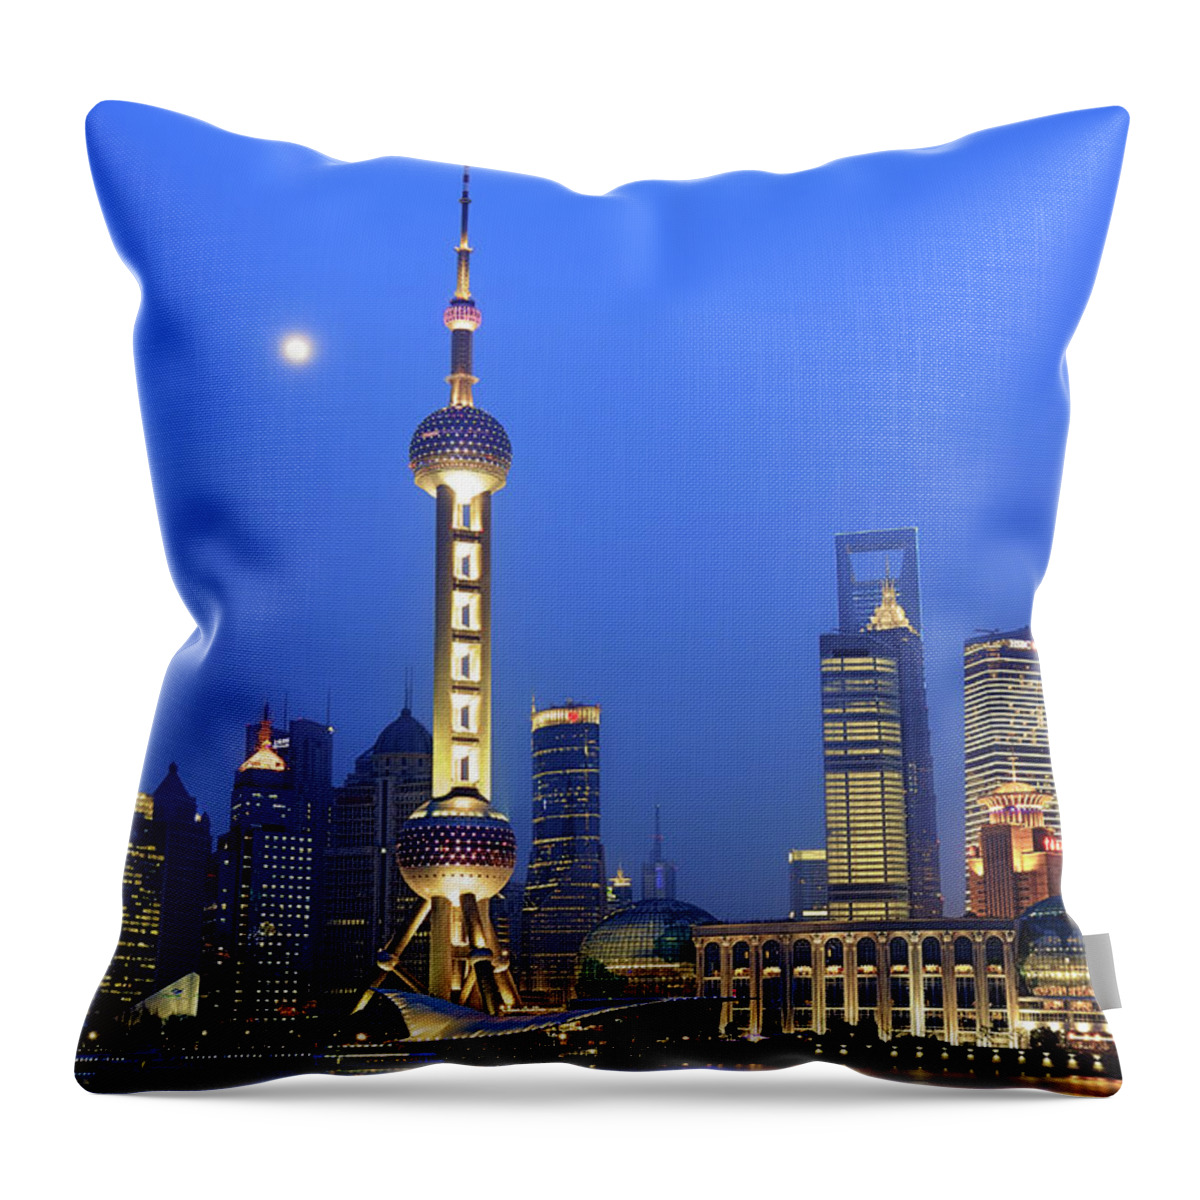 Tranquility Throw Pillow featuring the photograph Shanghai by Copyright Of Eason Lin Ladaga